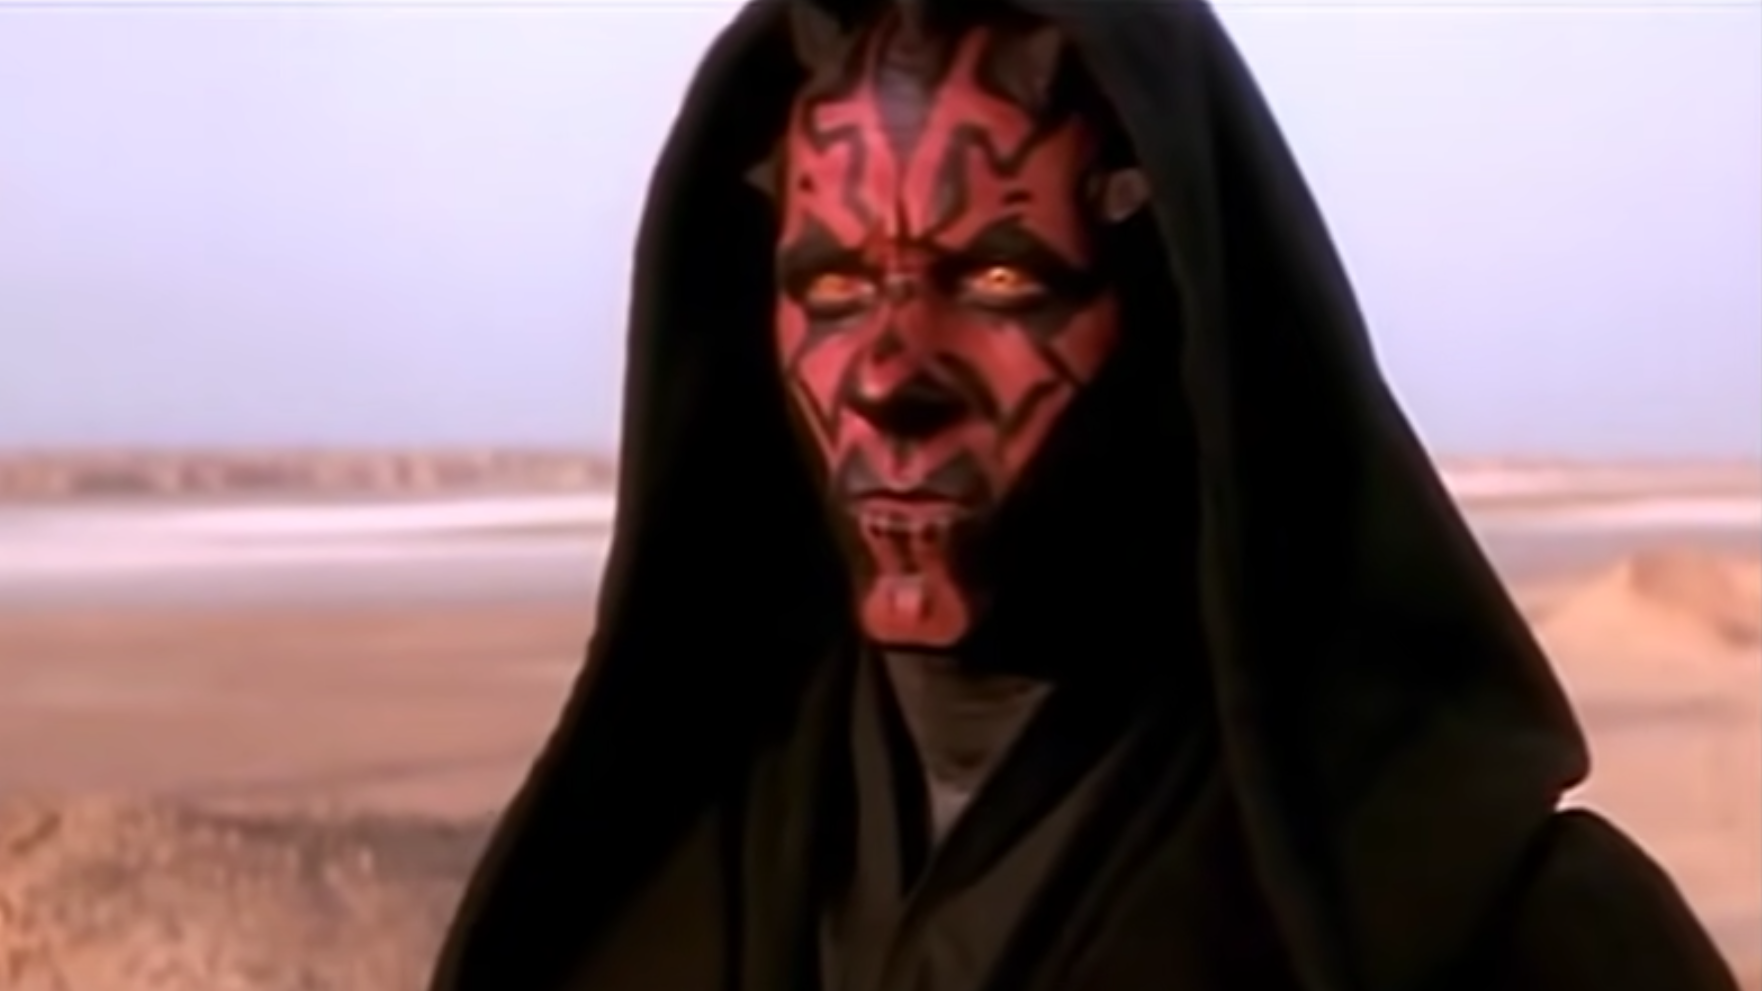 Darth Maul was reportedly supposed to come back in Obi-Wan Kenobi